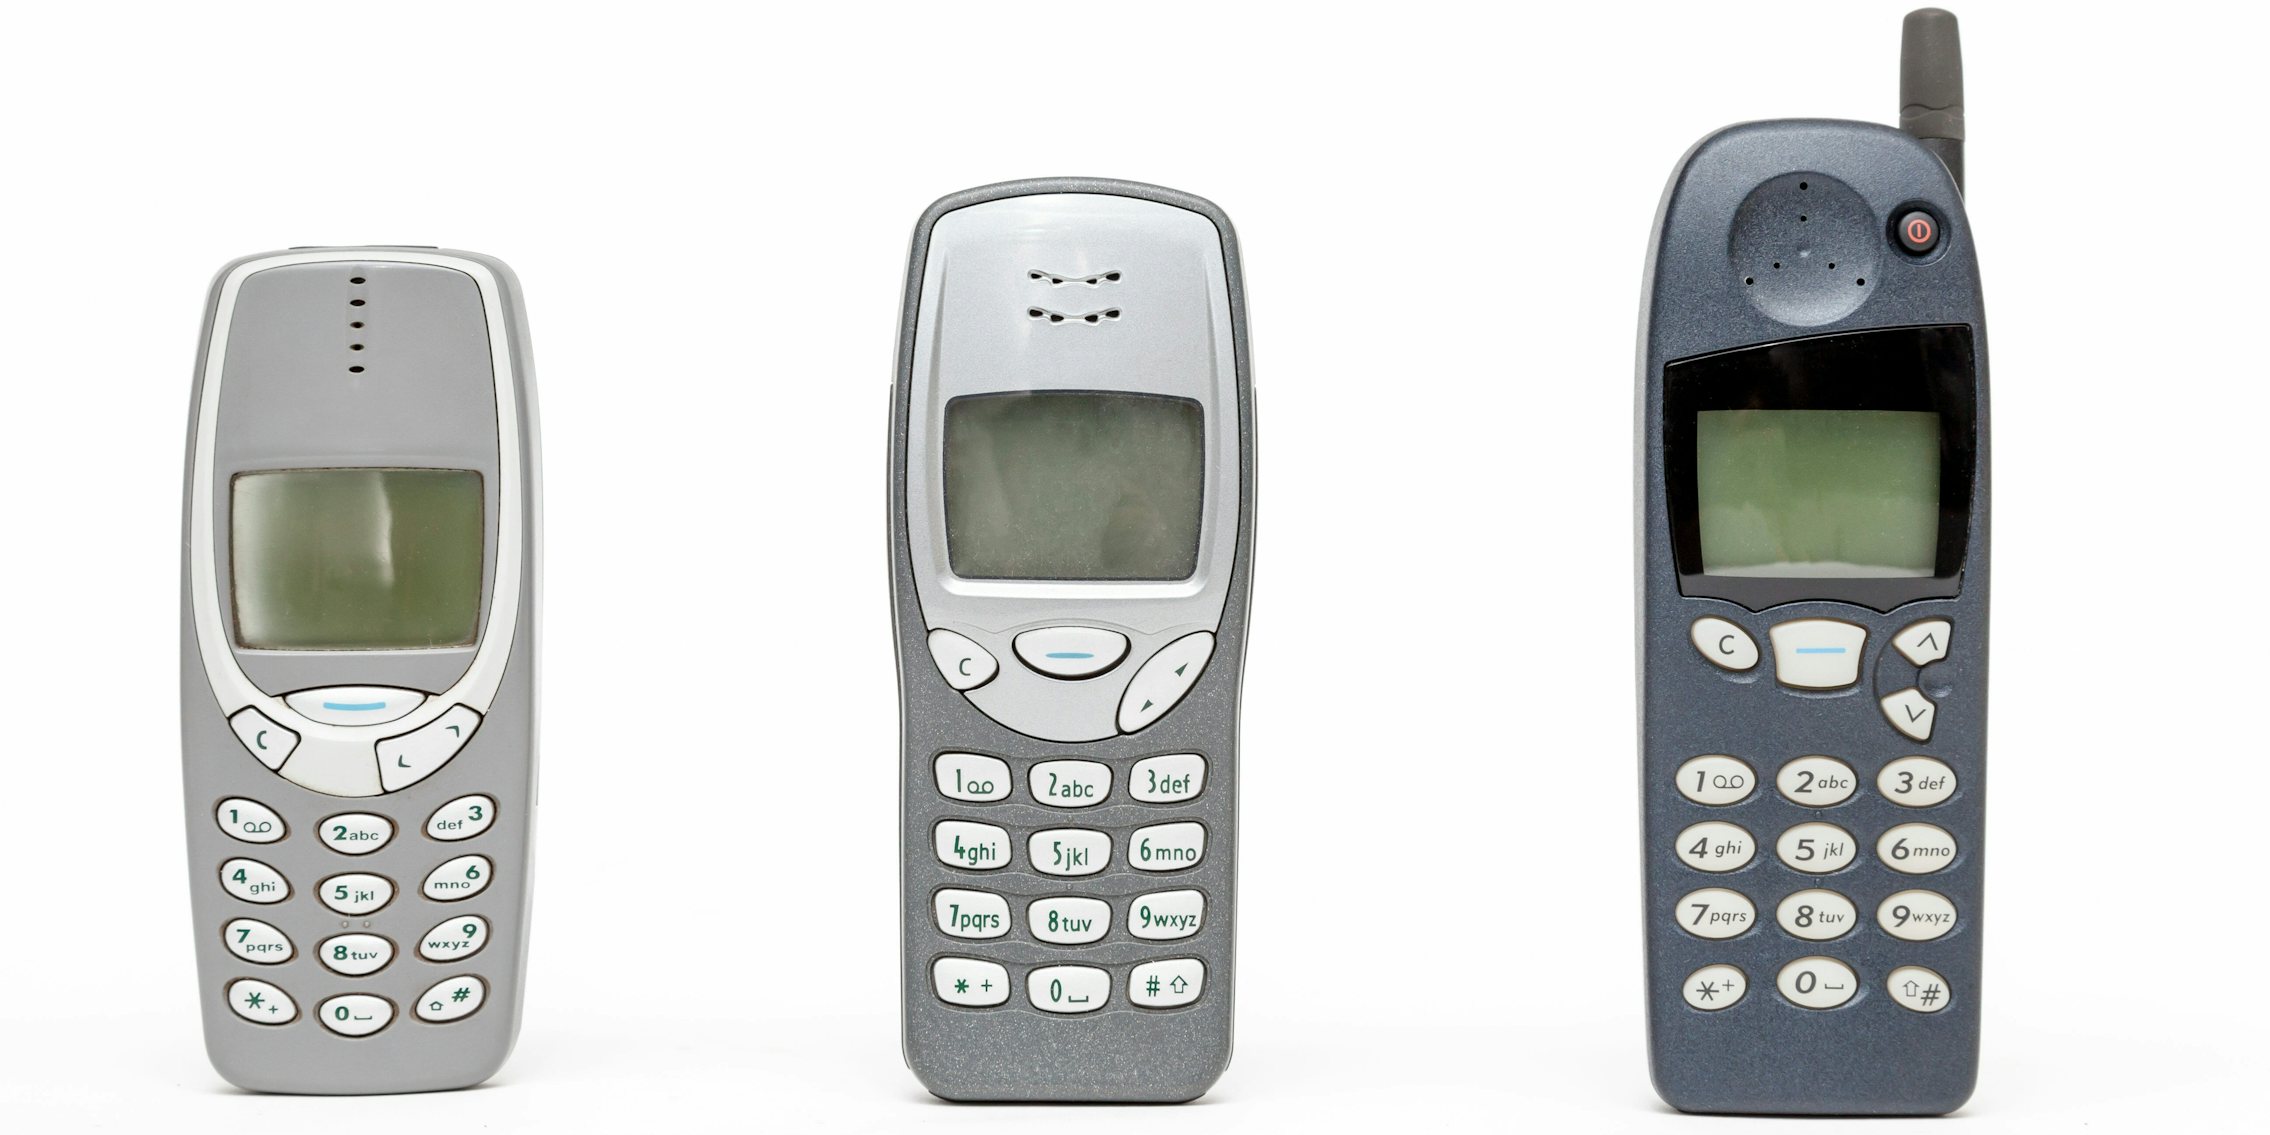 Nokia 3310: 12 Fascinating Facts About Nokia's Iconic 'Brick' Phone